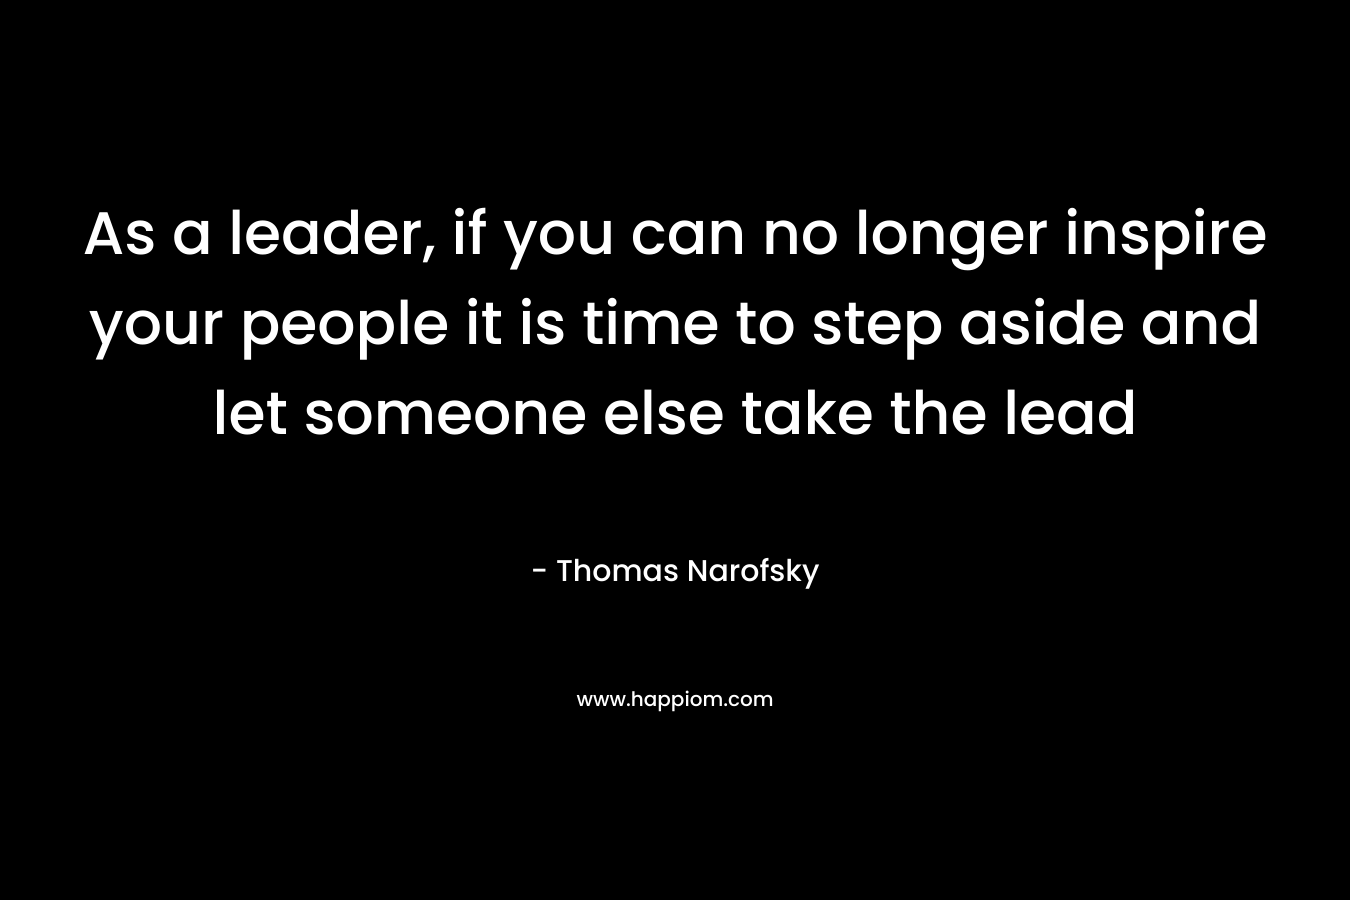 As a leader, if you can no longer inspire your people it is time to step aside and let someone else take the lead